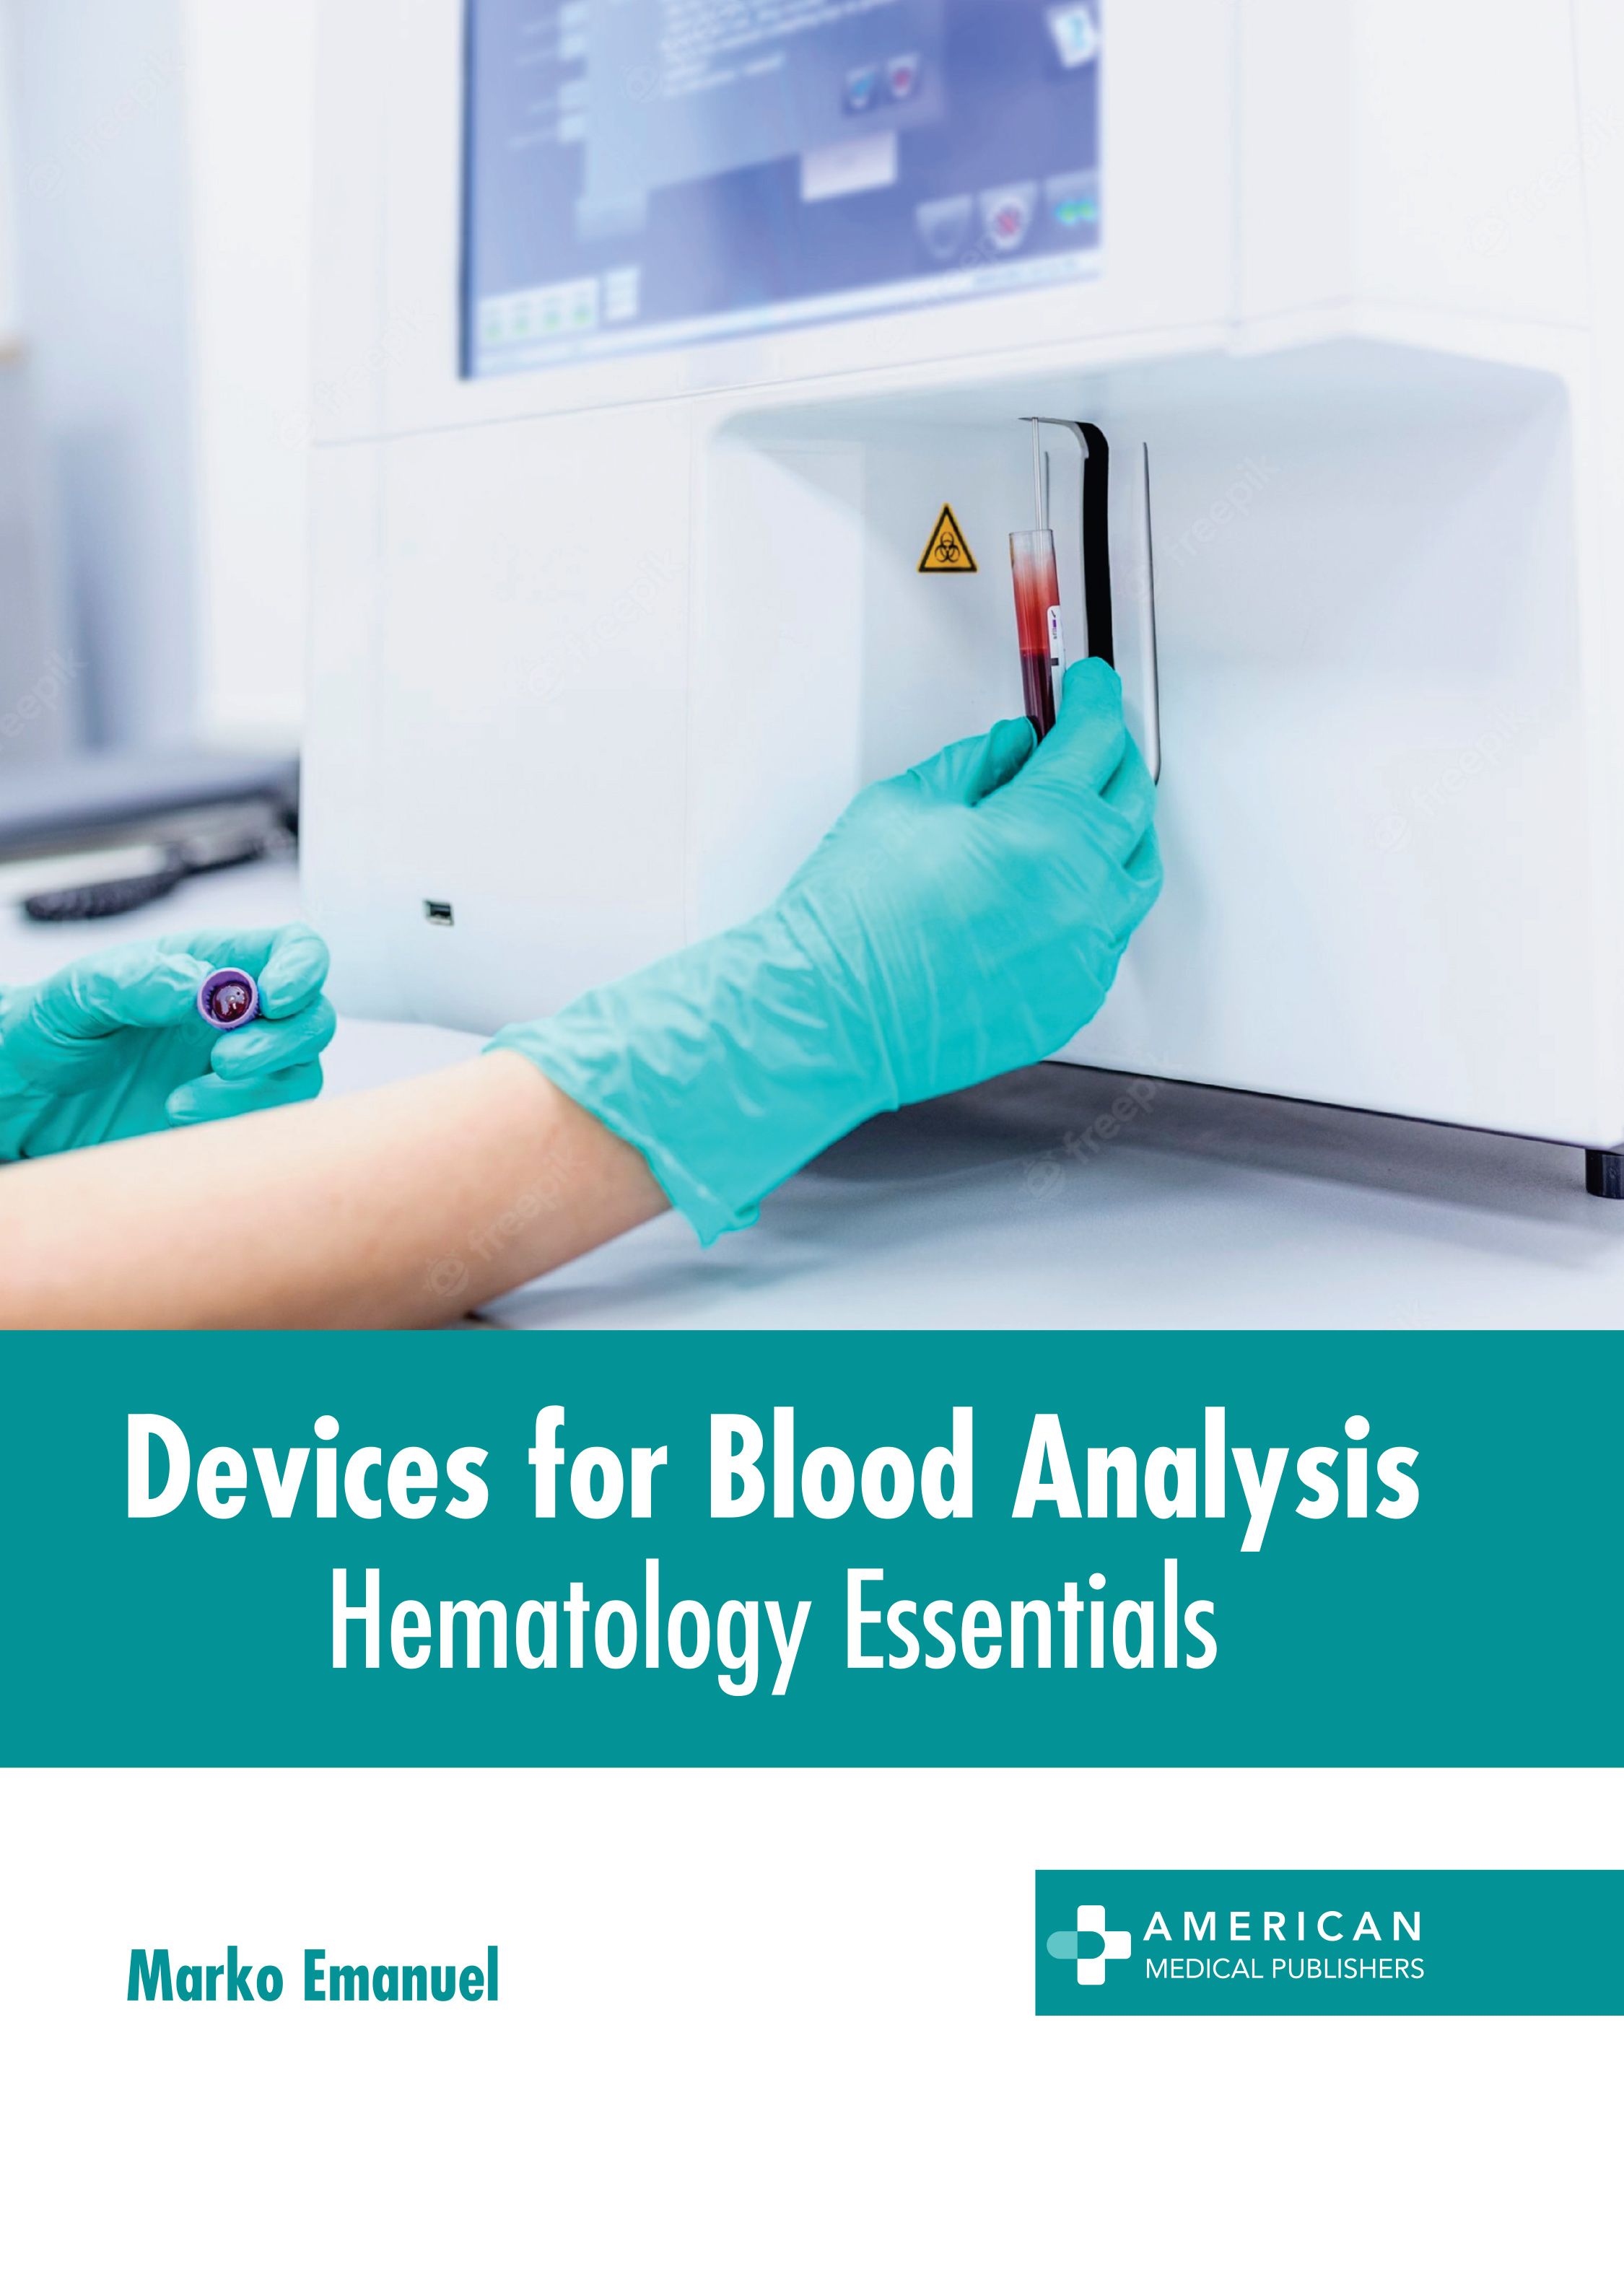 DEVICES FOR BLOOD ANALYSIS: HEMATOLOGY ESSENTIALS